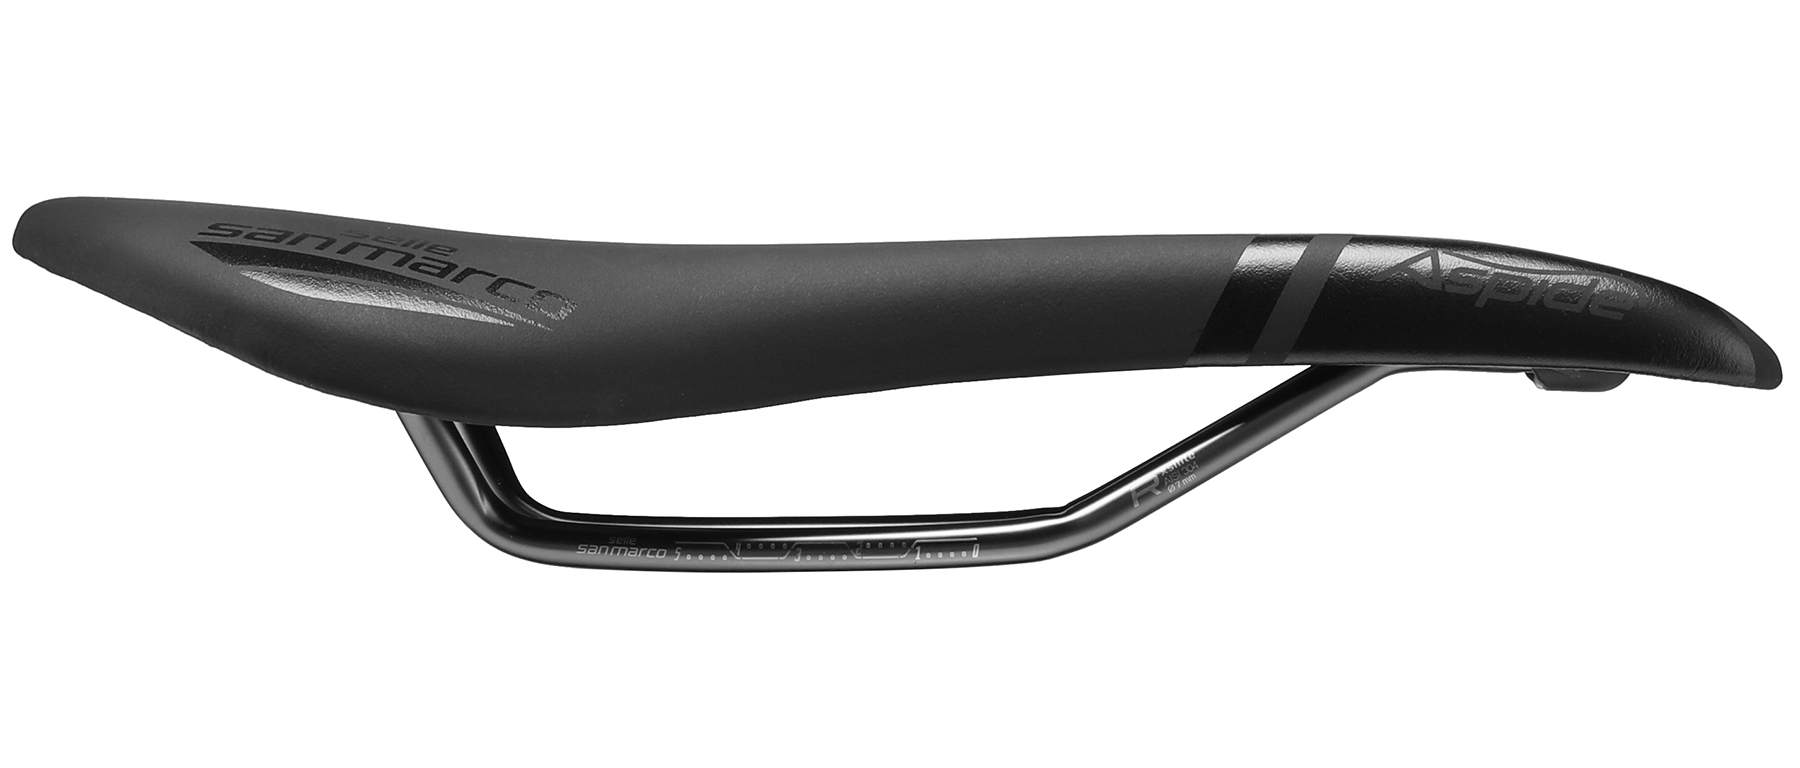 Selle San Marco Aspide Racing Xsilite Open-Fit Saddle